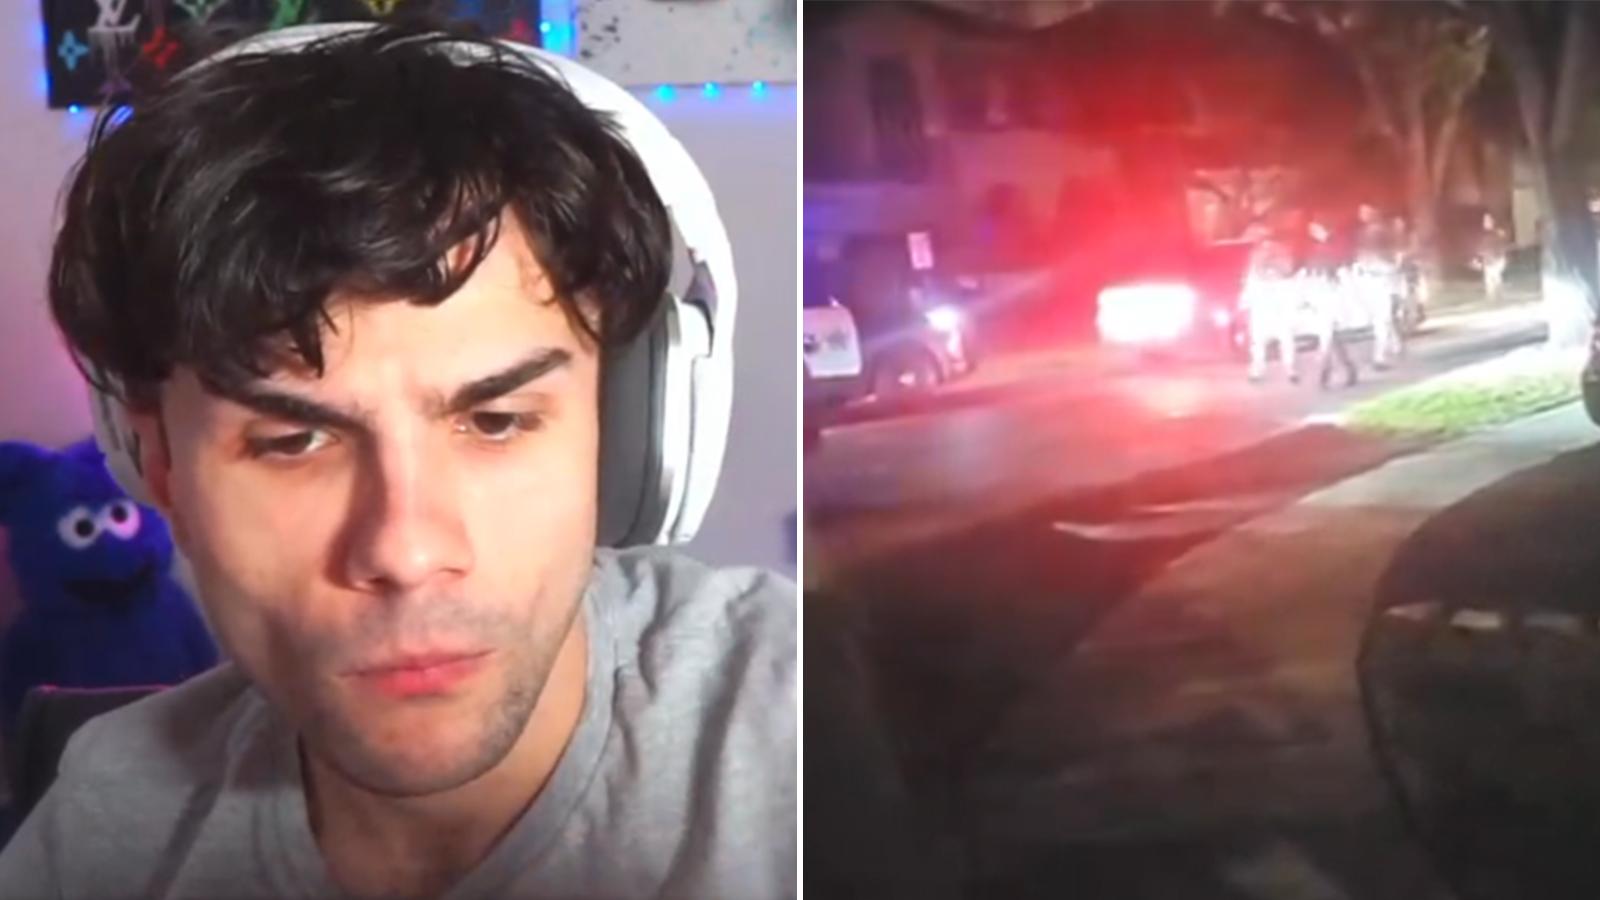 kick-streamer-swatted-calling-cops-friends